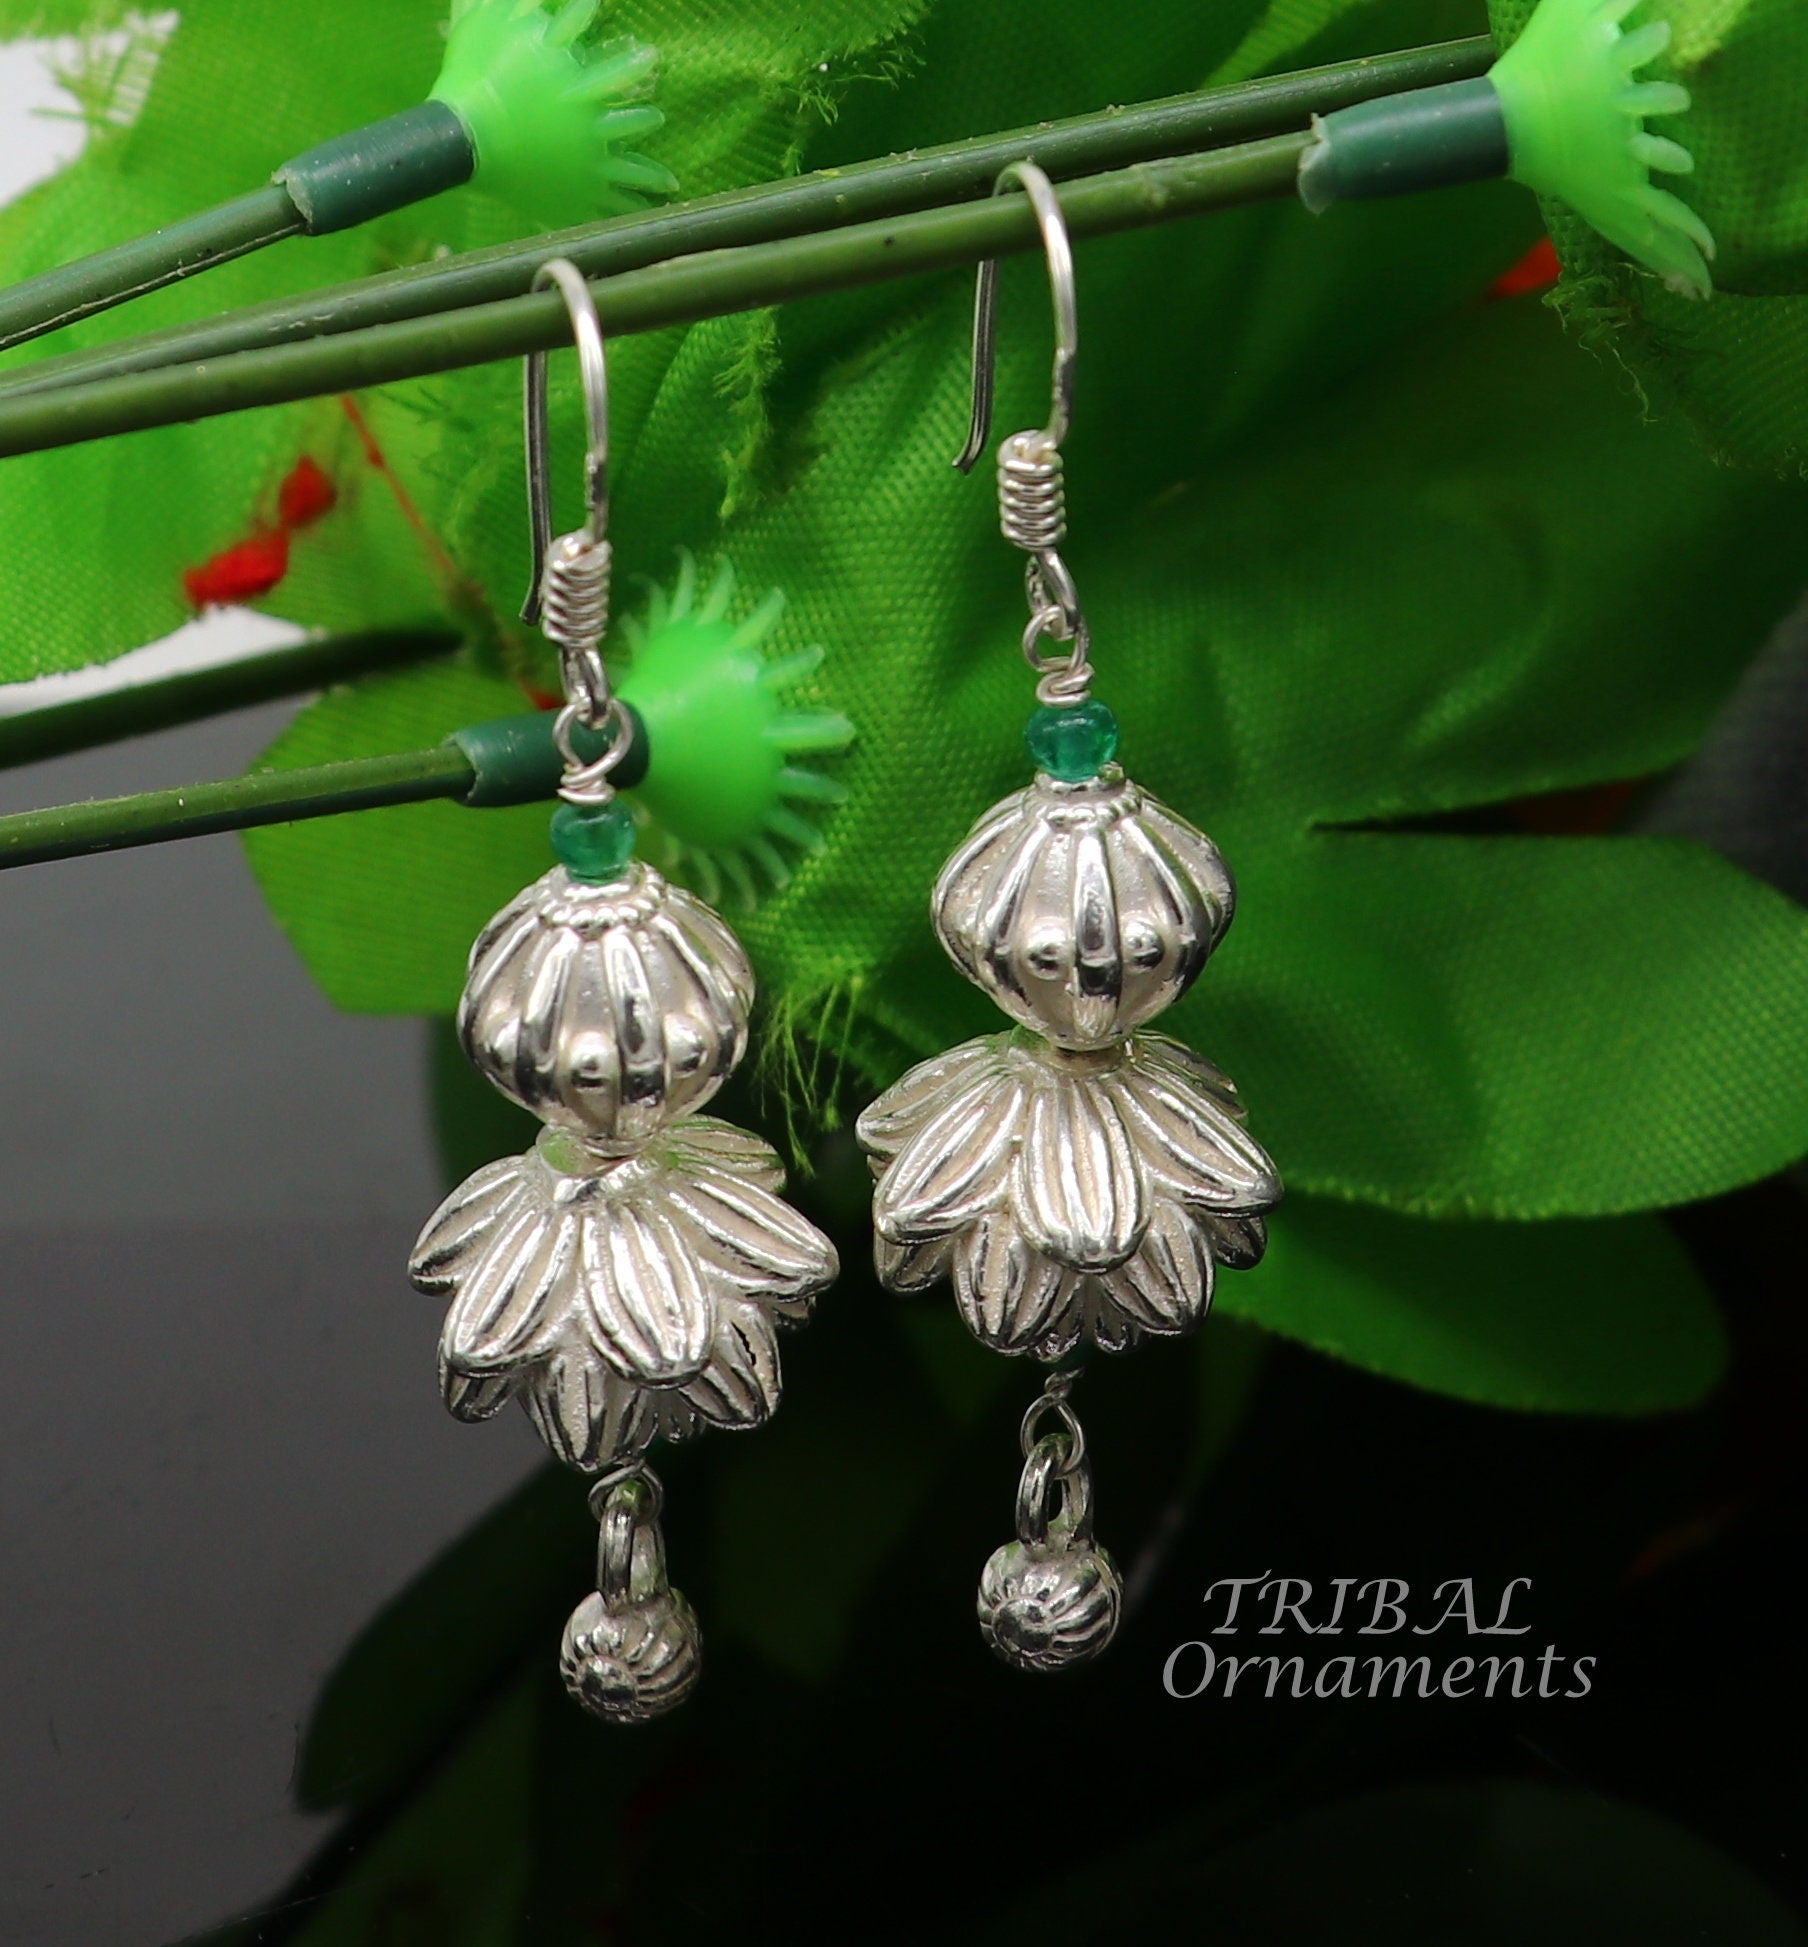 925 sterling silver handmade white finish hook earrings, fabulous hanging drop dangle earrings tribal ethnic jewelry from India s1087 - TRIBAL ORNAMENTS